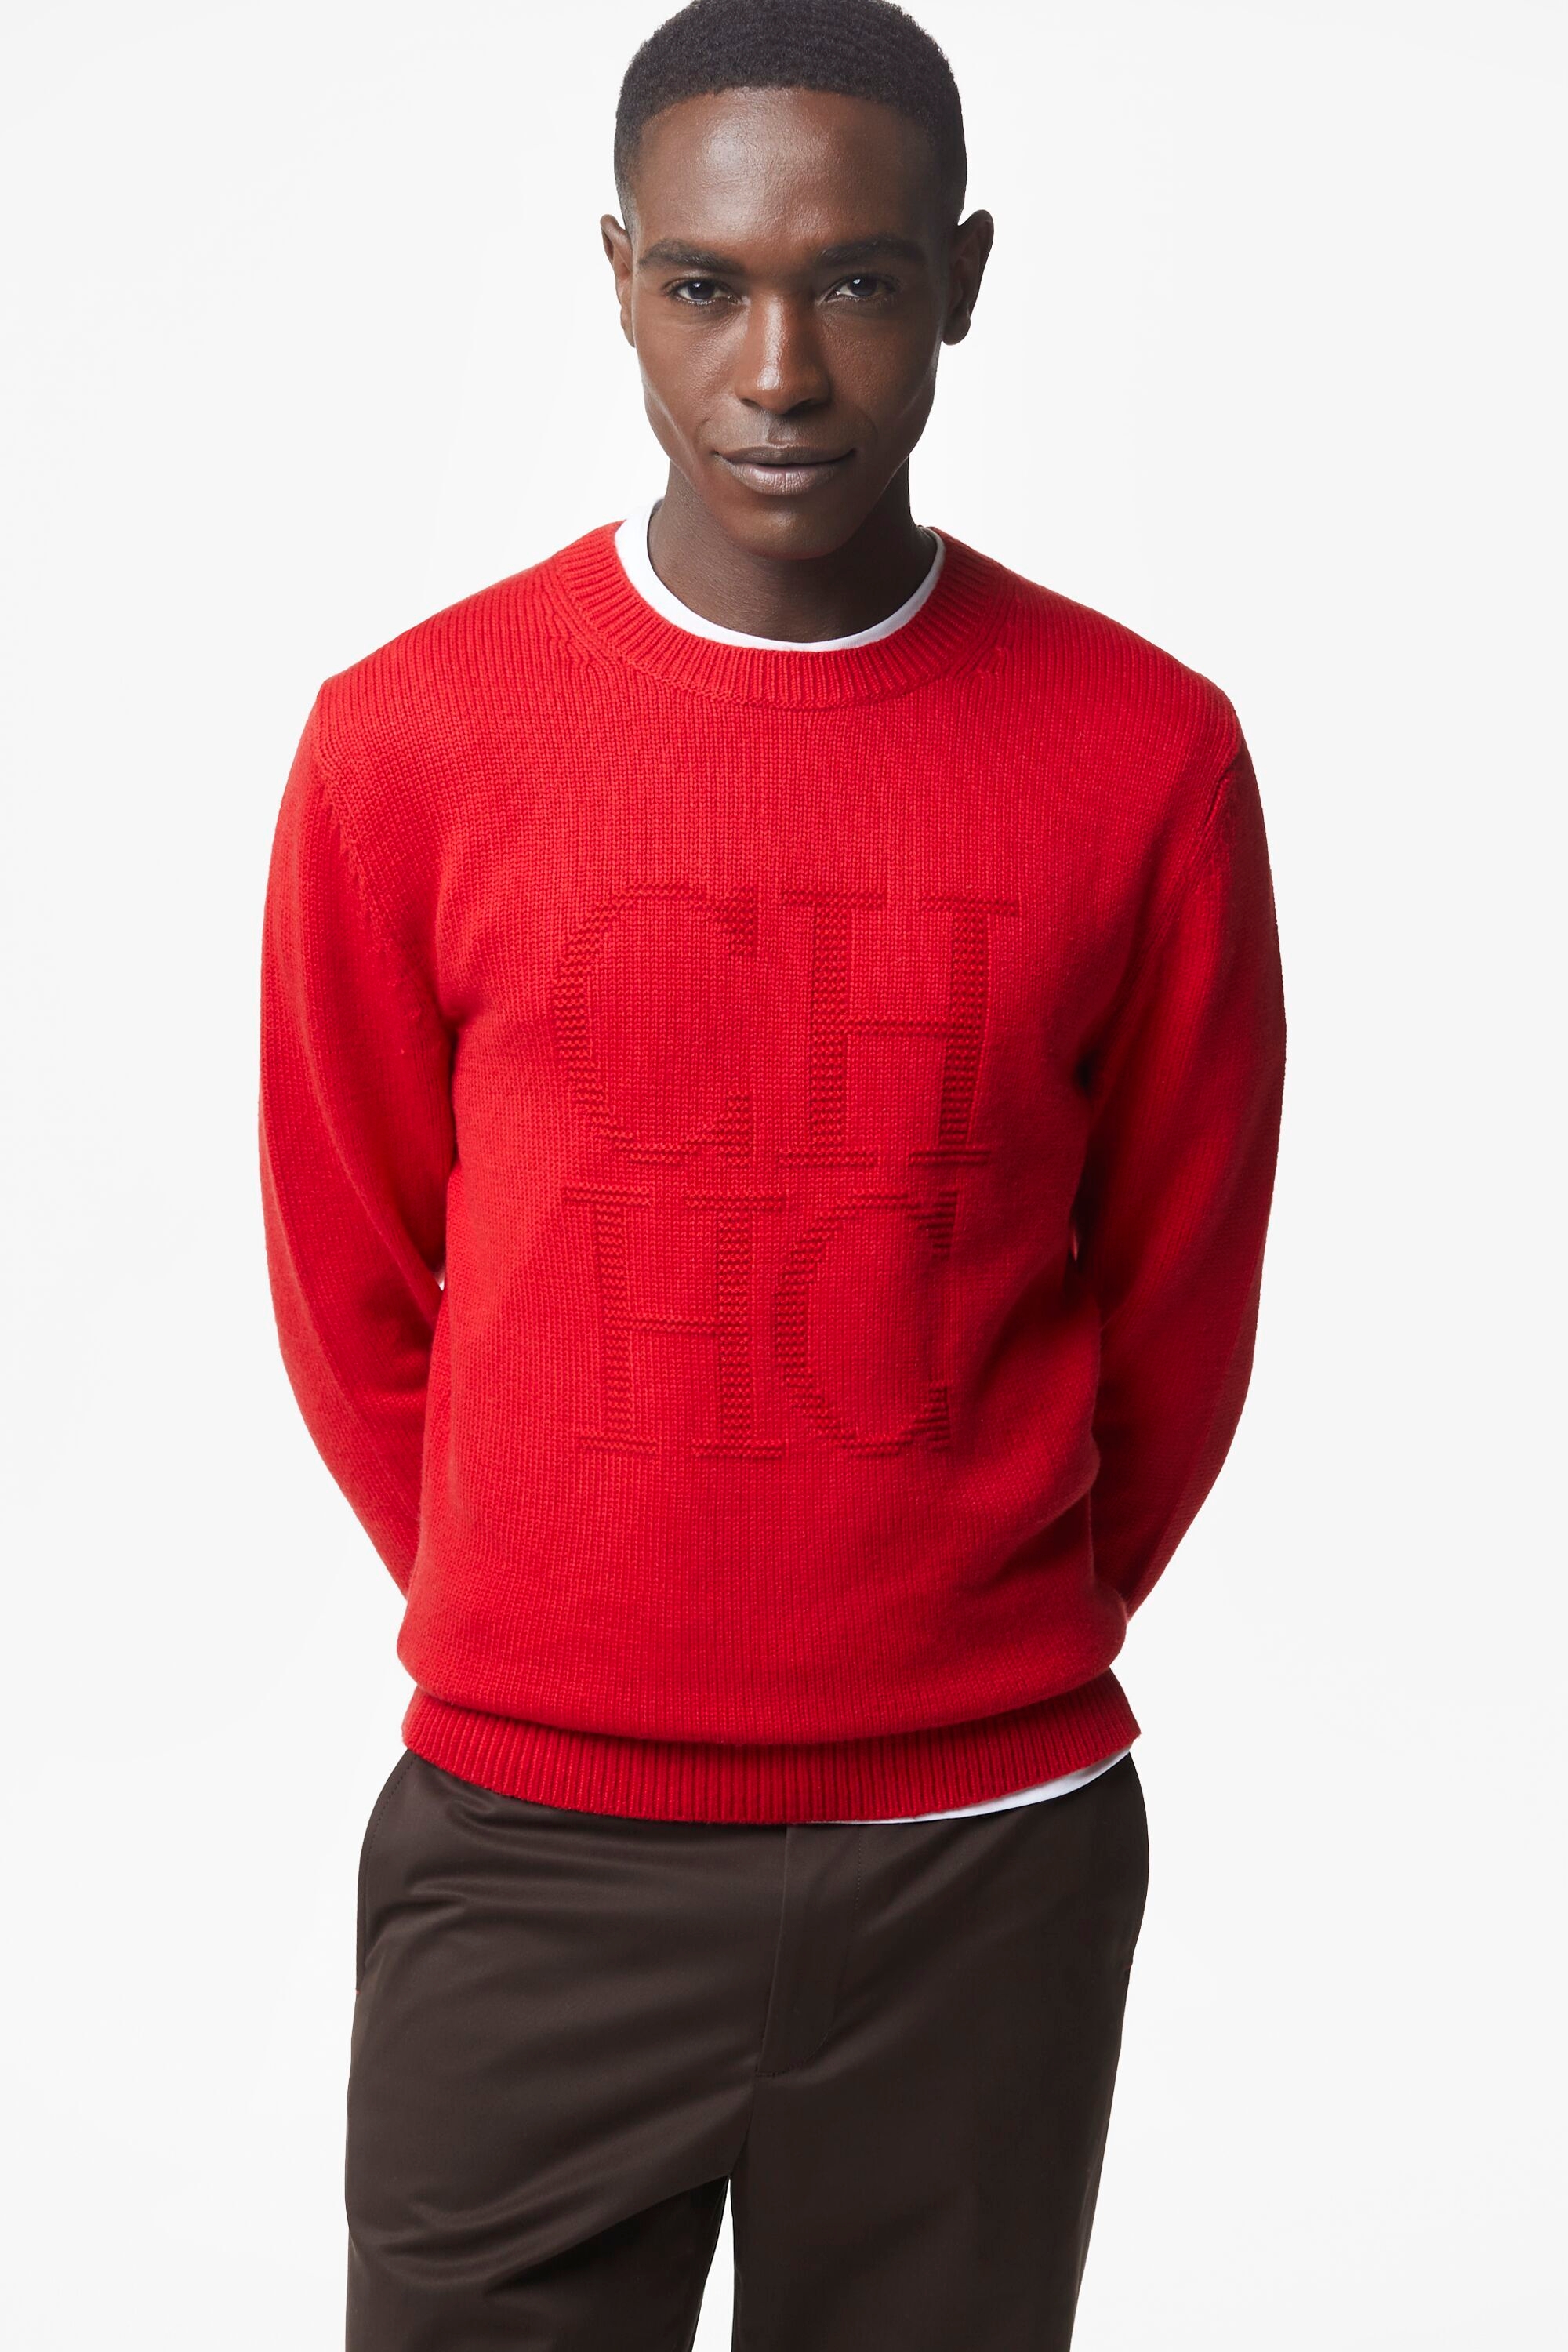 CH wool and cashmere sweater